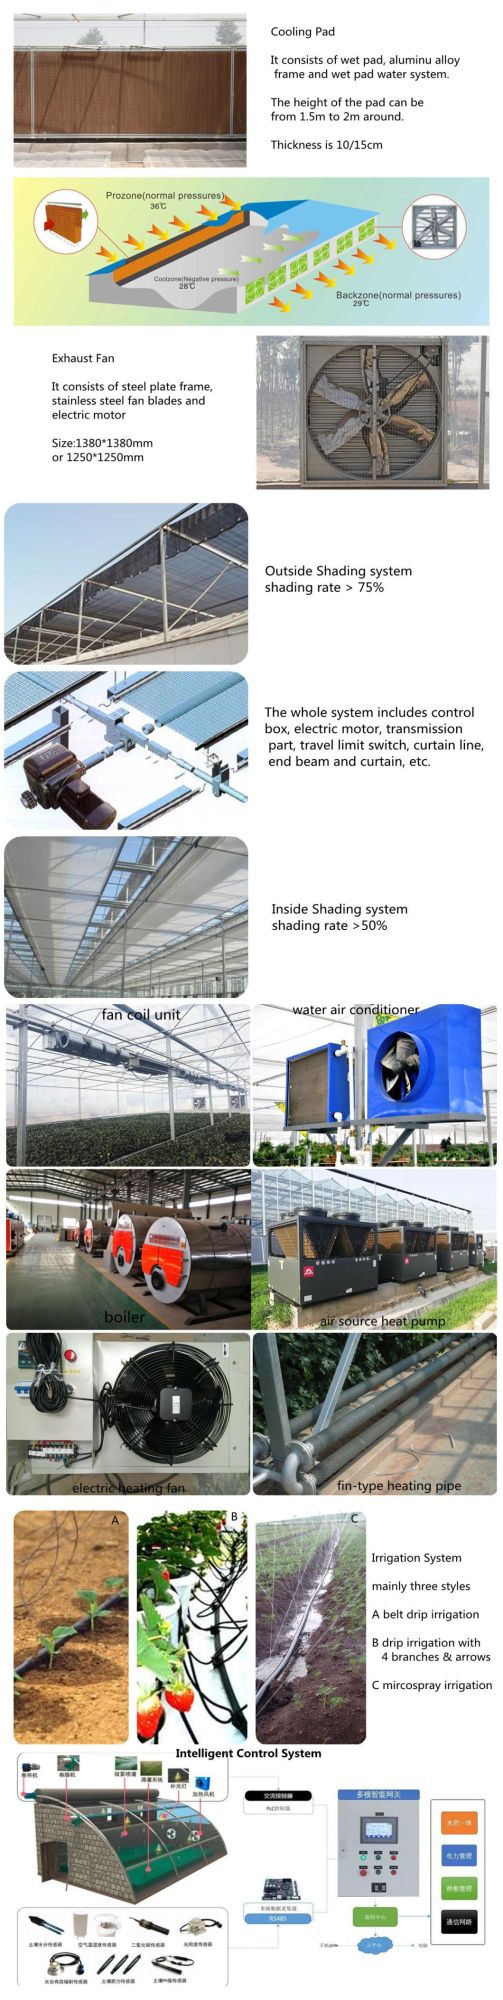 Pneumatic Seedling Machine for Various Sizes of Seeds for Both Leafy and Fruit Vegetables Seeds Sowing for Agriculture